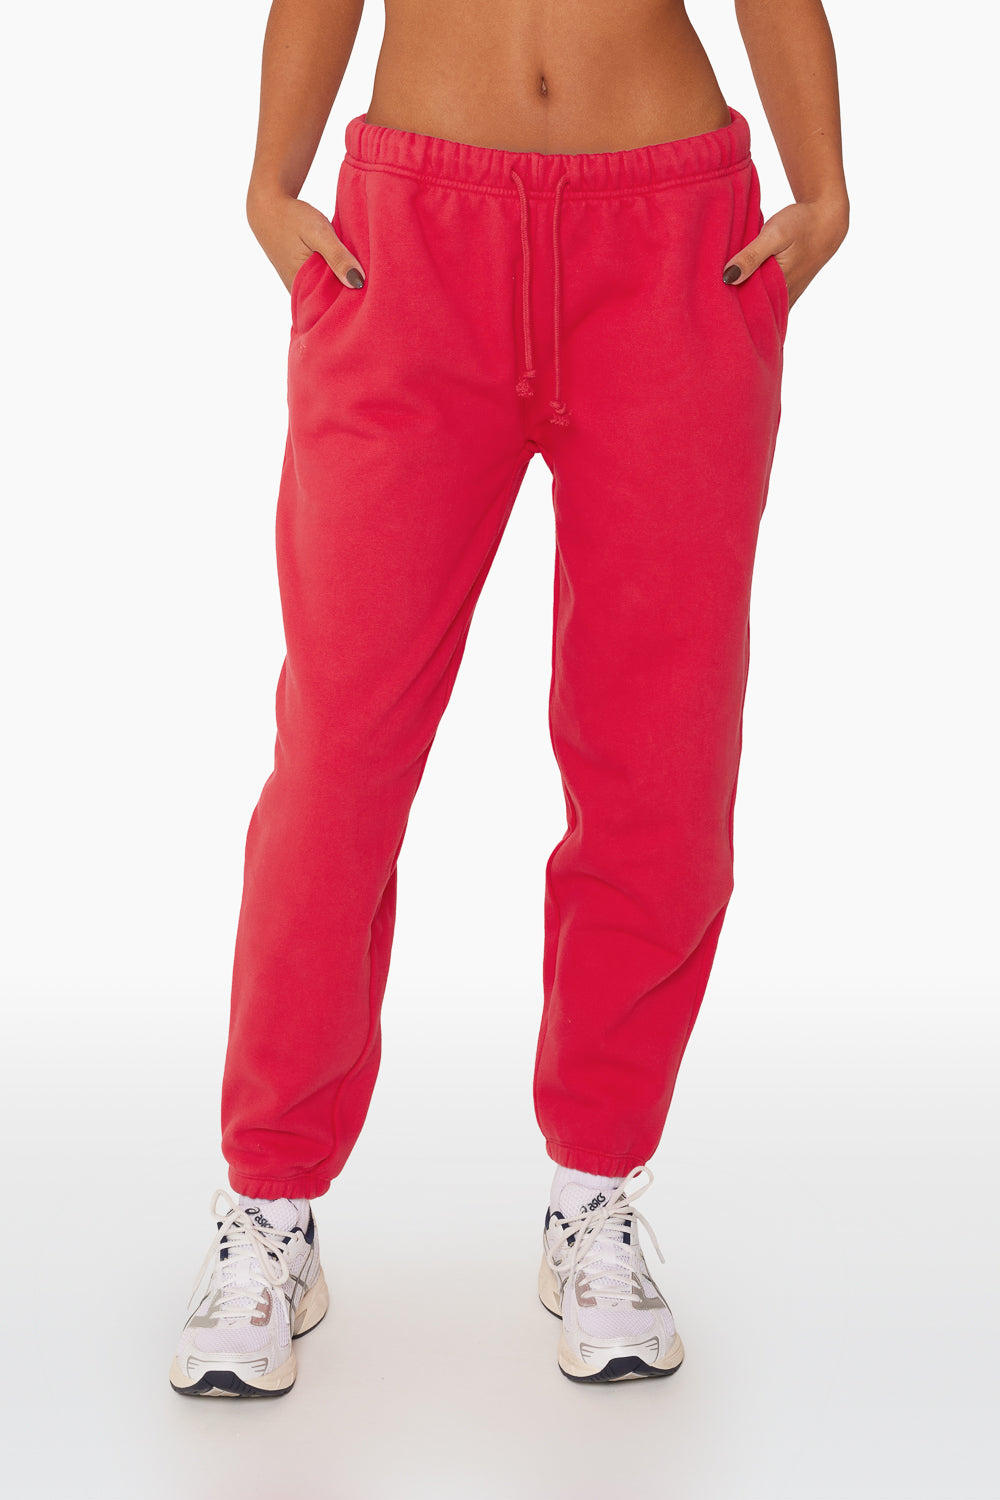 HEAVYWEIGHT SWEATS DRAWSTRING SWEATPANTS - SPICY Featured Image